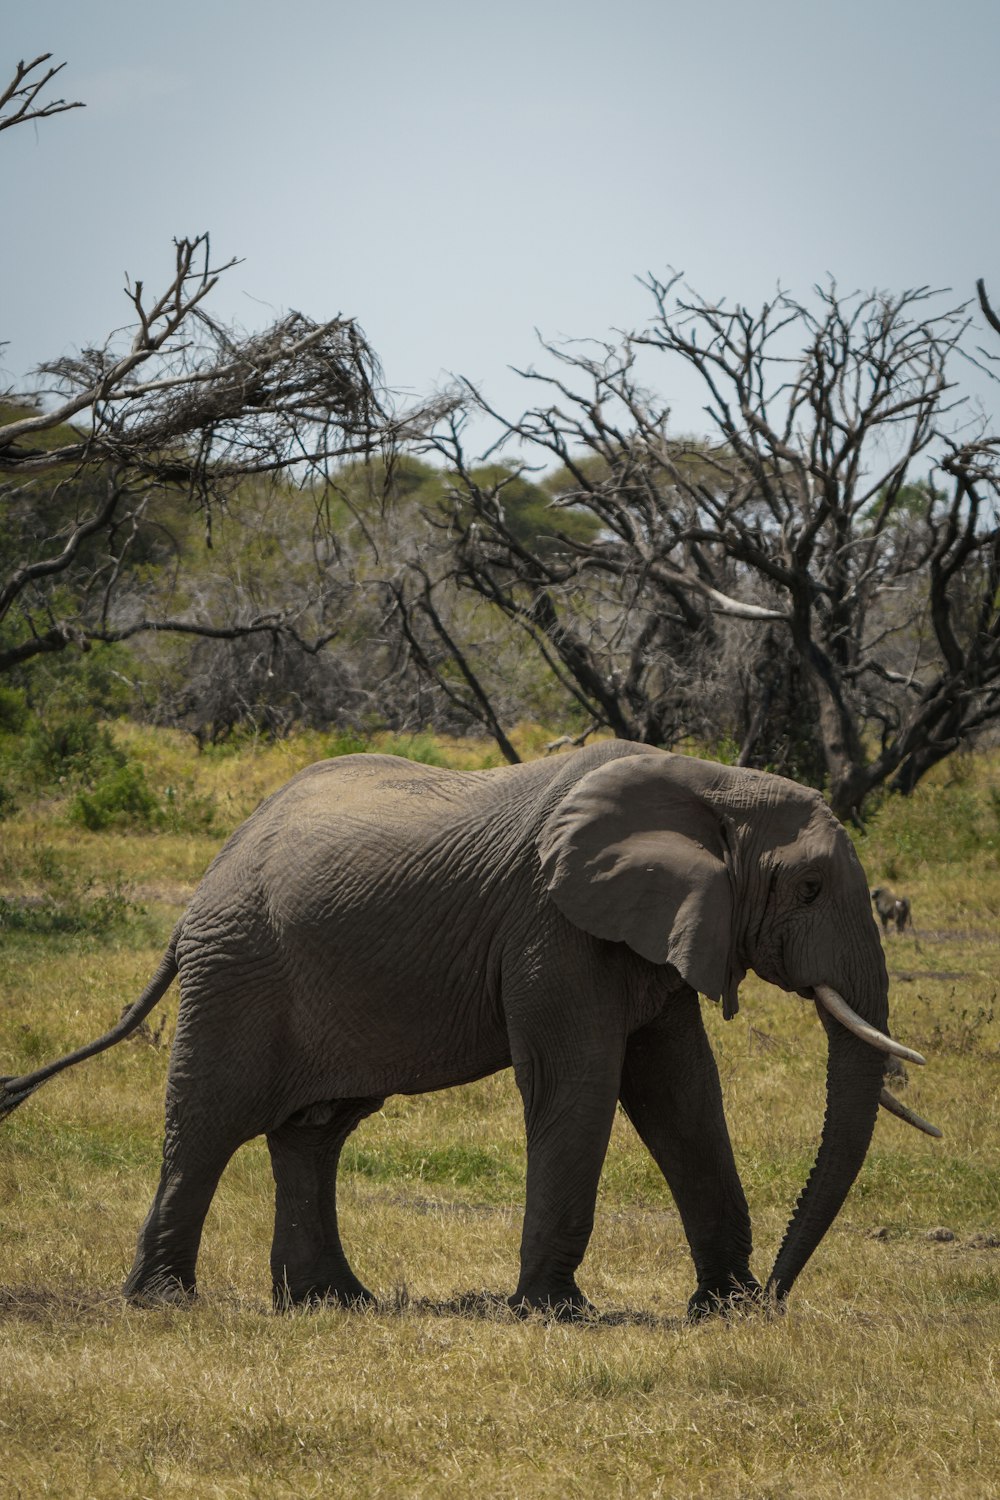 an elephant walking through a grassy field with trees in the background